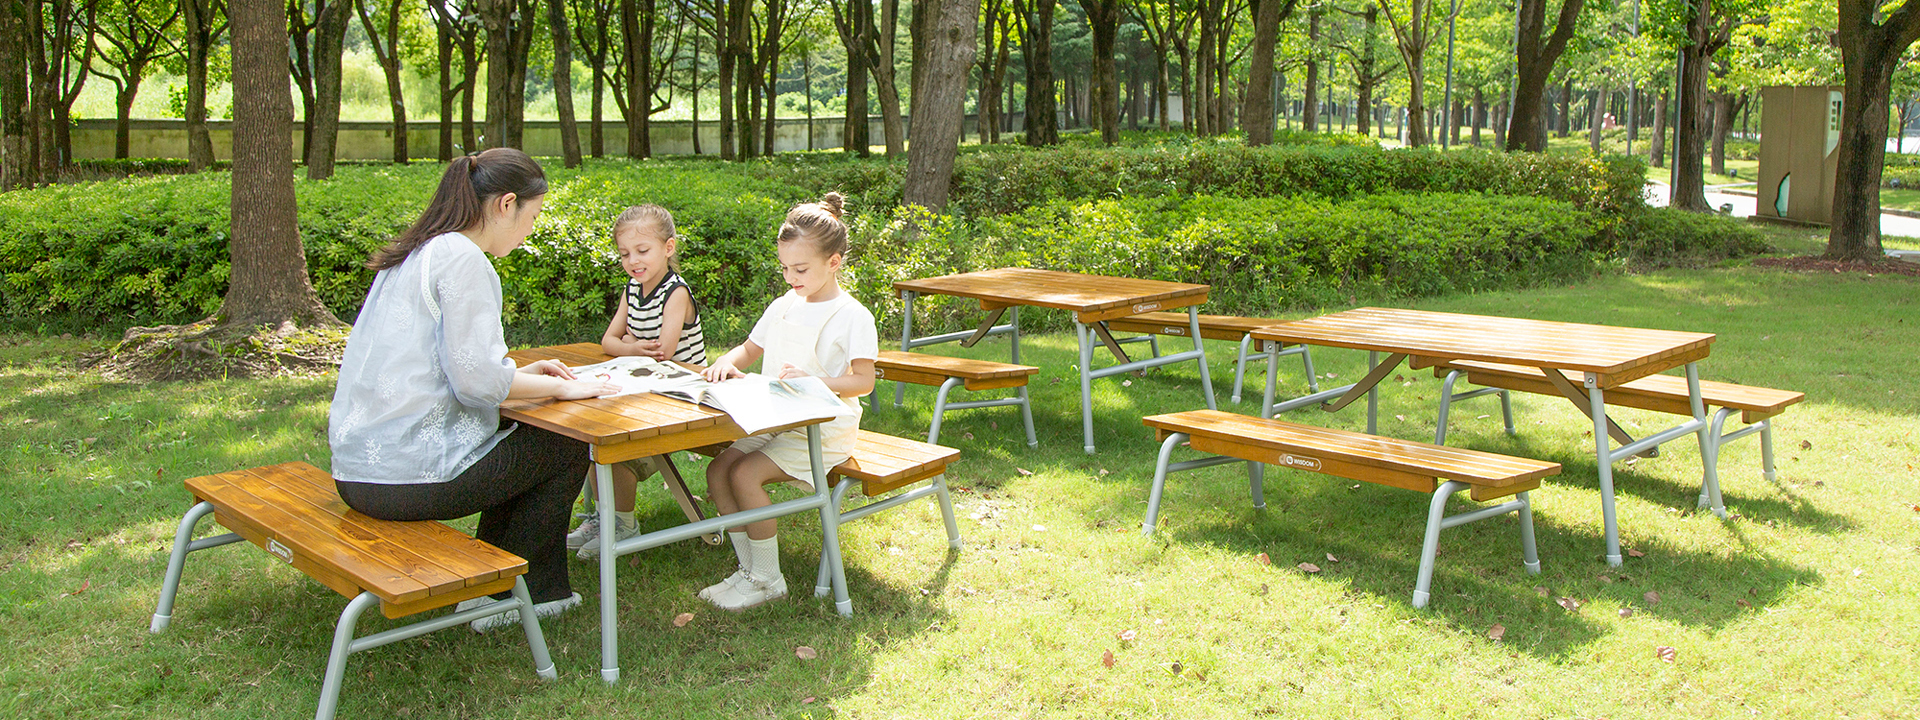 Transform outdoor spaces into engaging classrooms